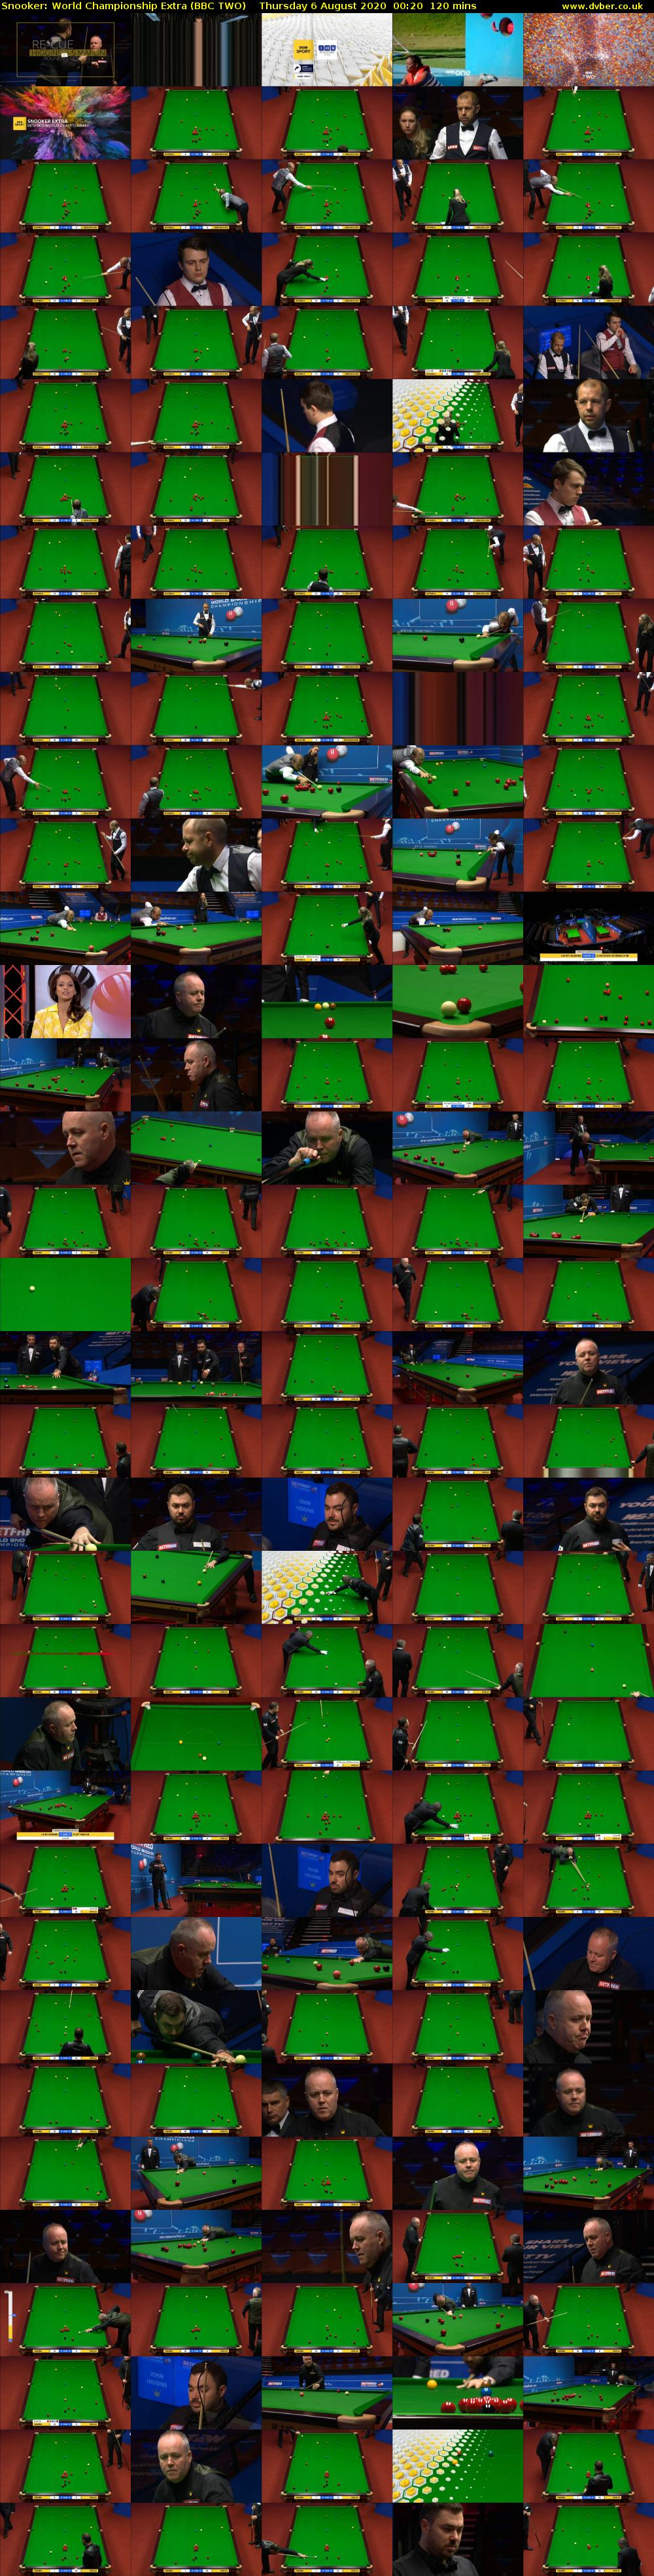 Snooker: World Championship Extra (BBC TWO) Thursday 6 August 2020 00:20 - 02:20